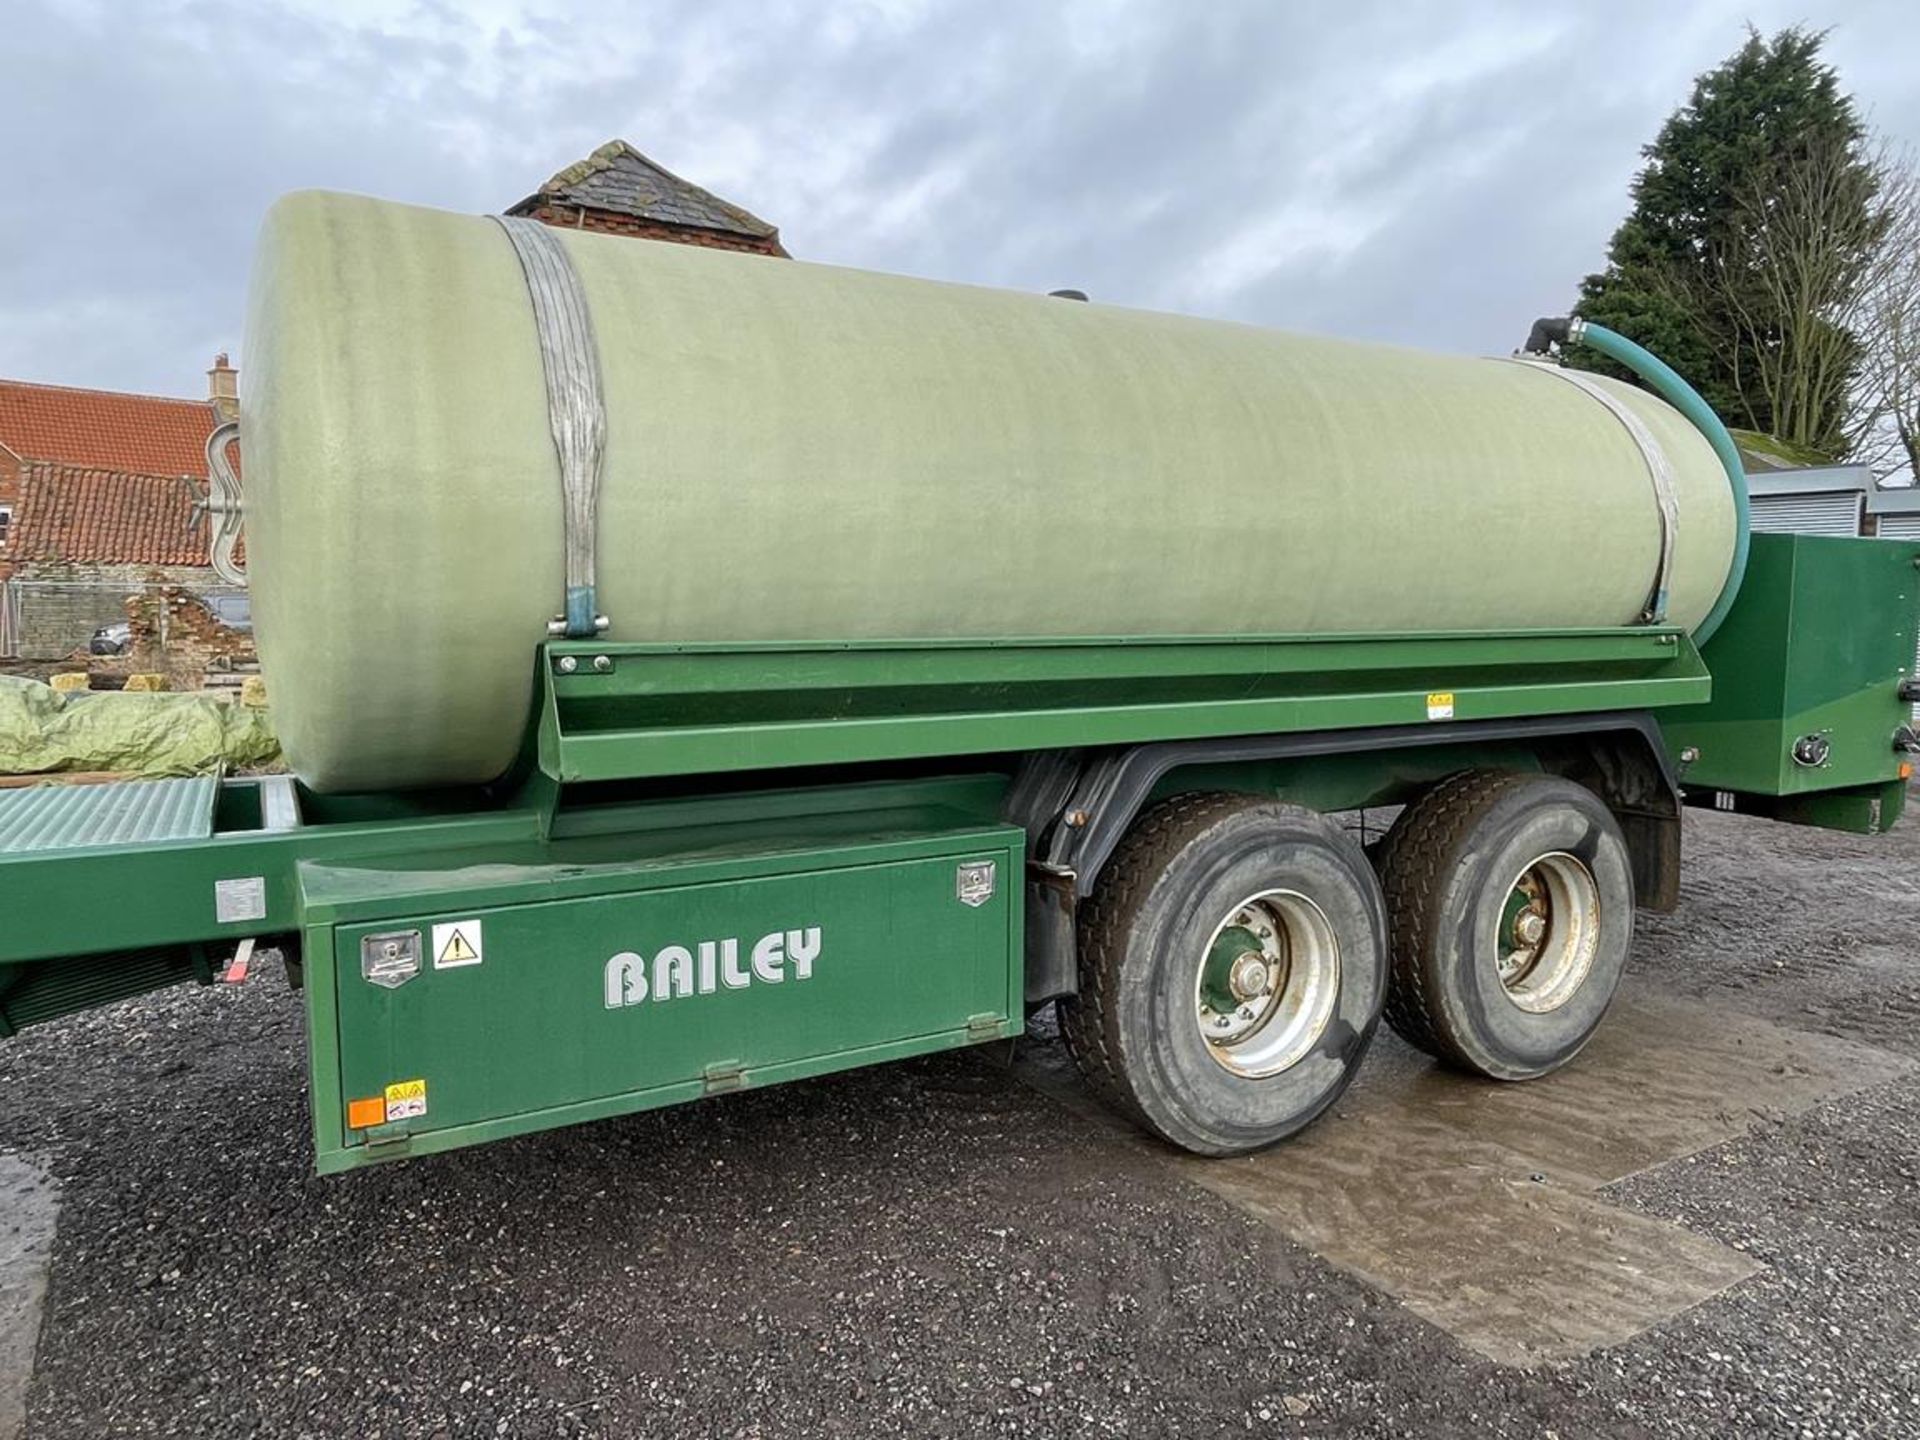 2018 Bailey 15,000 Litre Water Bowser Double Axle Fibreglass Trailer S/No. 1702316, Commercial - Image 6 of 10